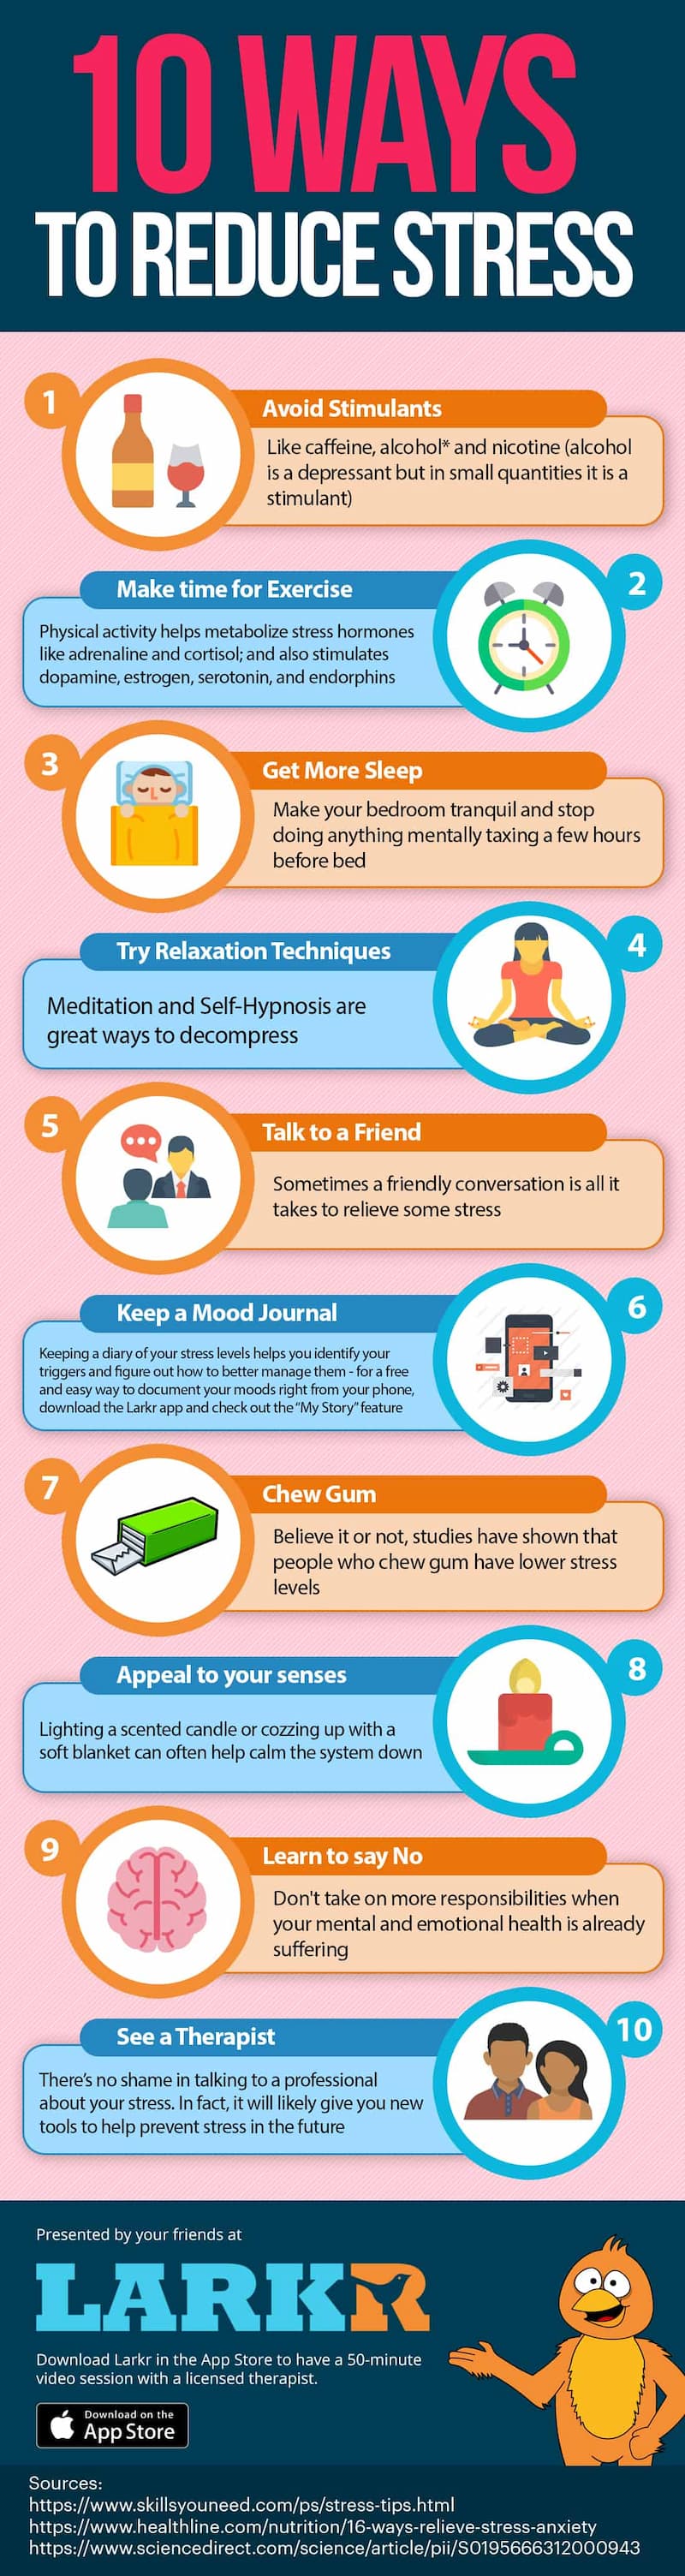 Top tips to reduce your stress